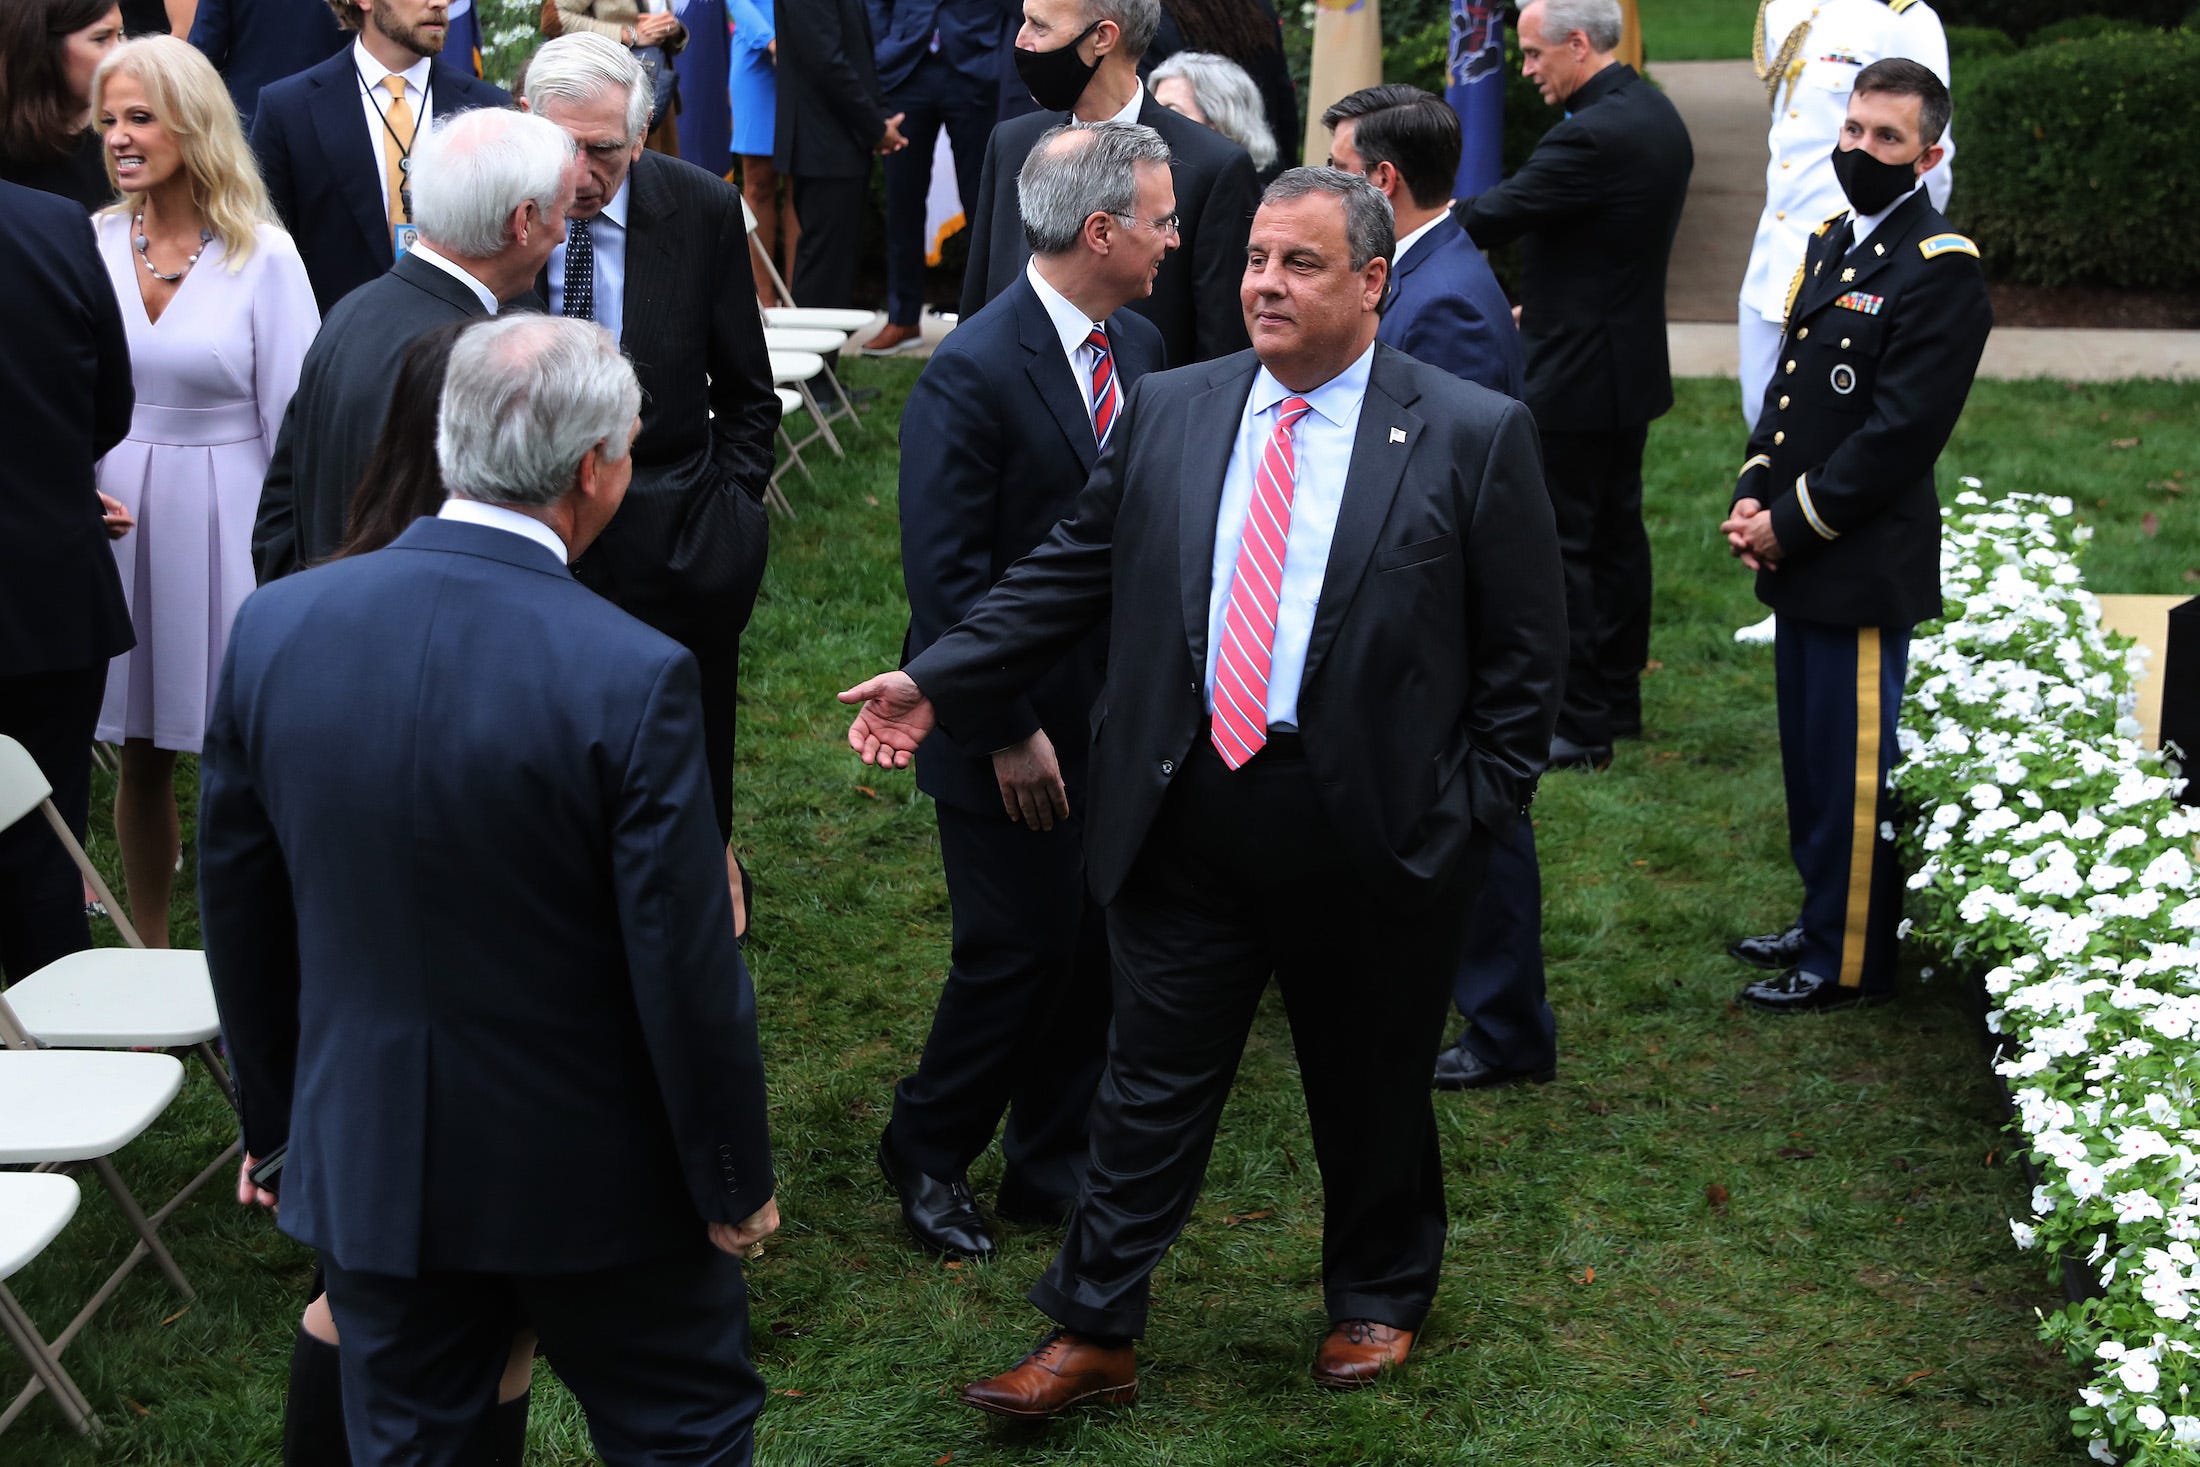 ACB rose garden event no distance  christie positive and shaking hands